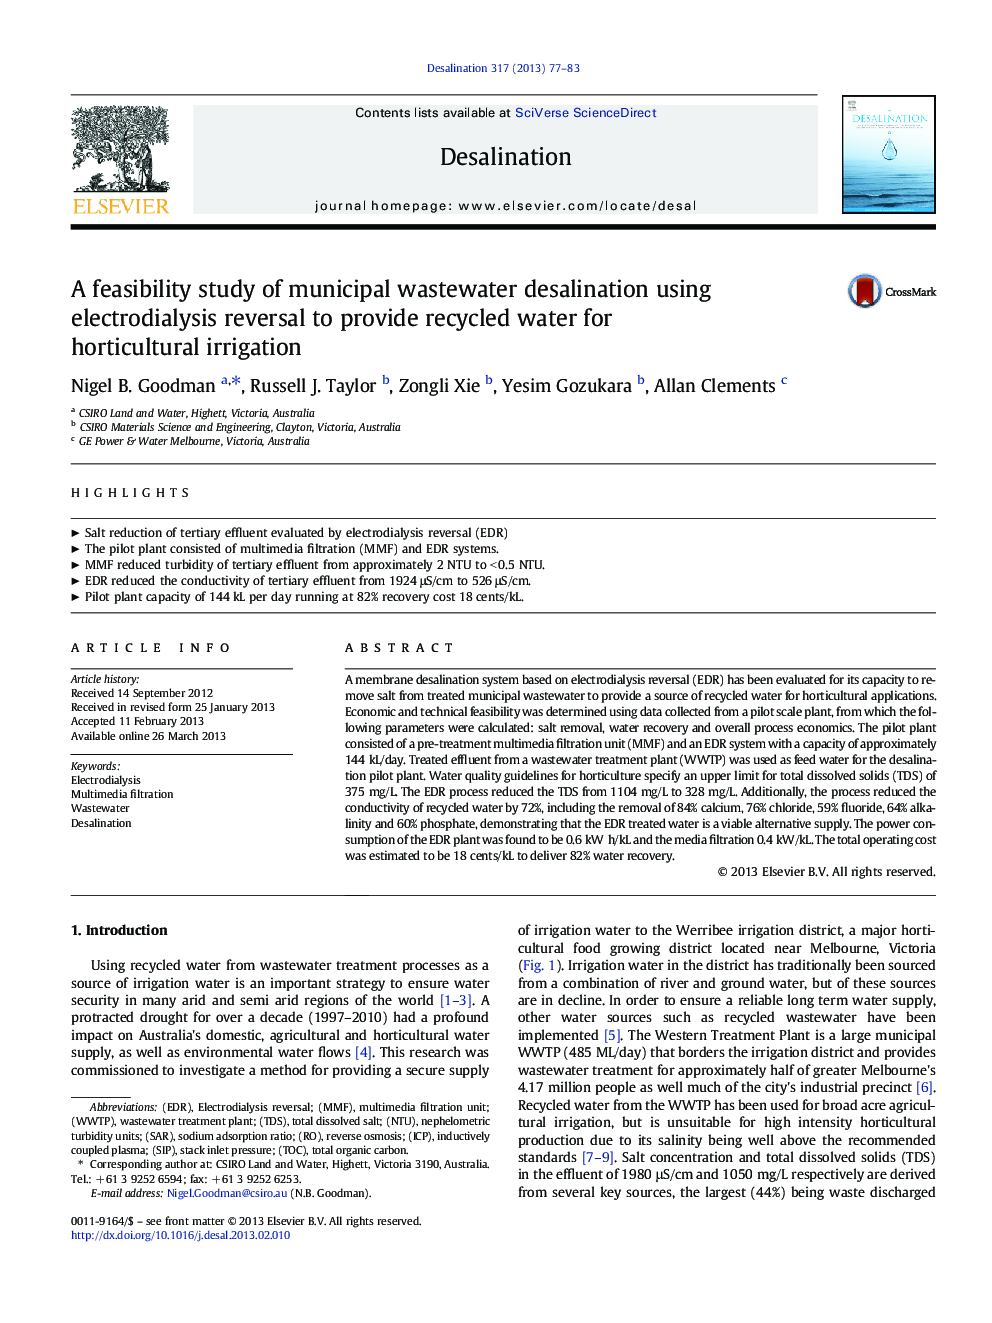 A feasibility study of municipal wastewater desalination using electrodialysis reversal to provide recycled water for horticultural irrigation